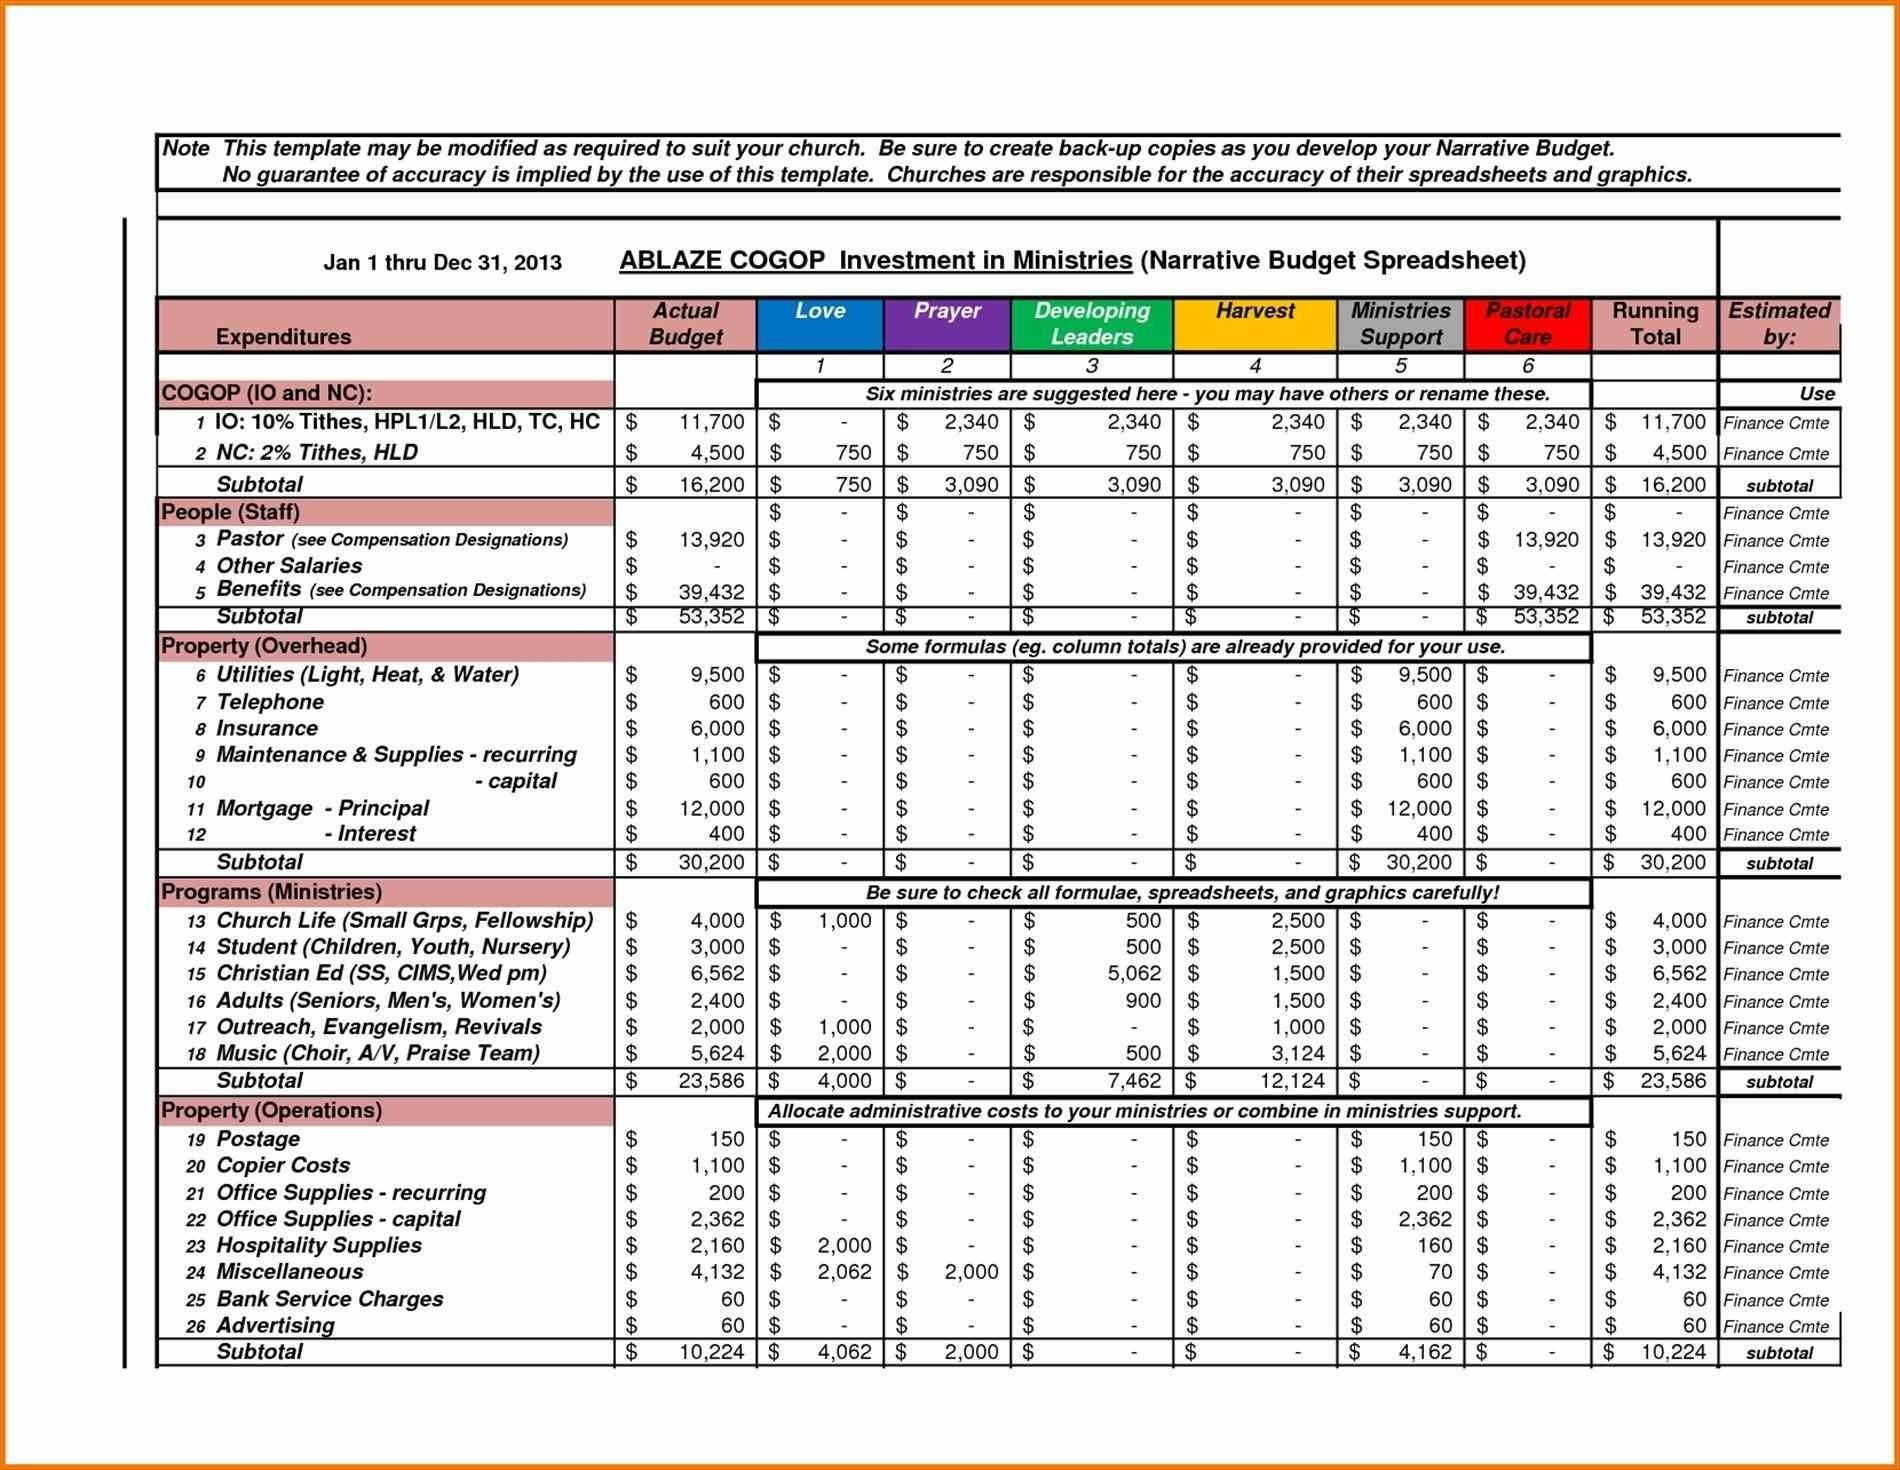 Annual Business Budget Template Excel Best Of Design Plan regarding Annual Business Budget Template Excel